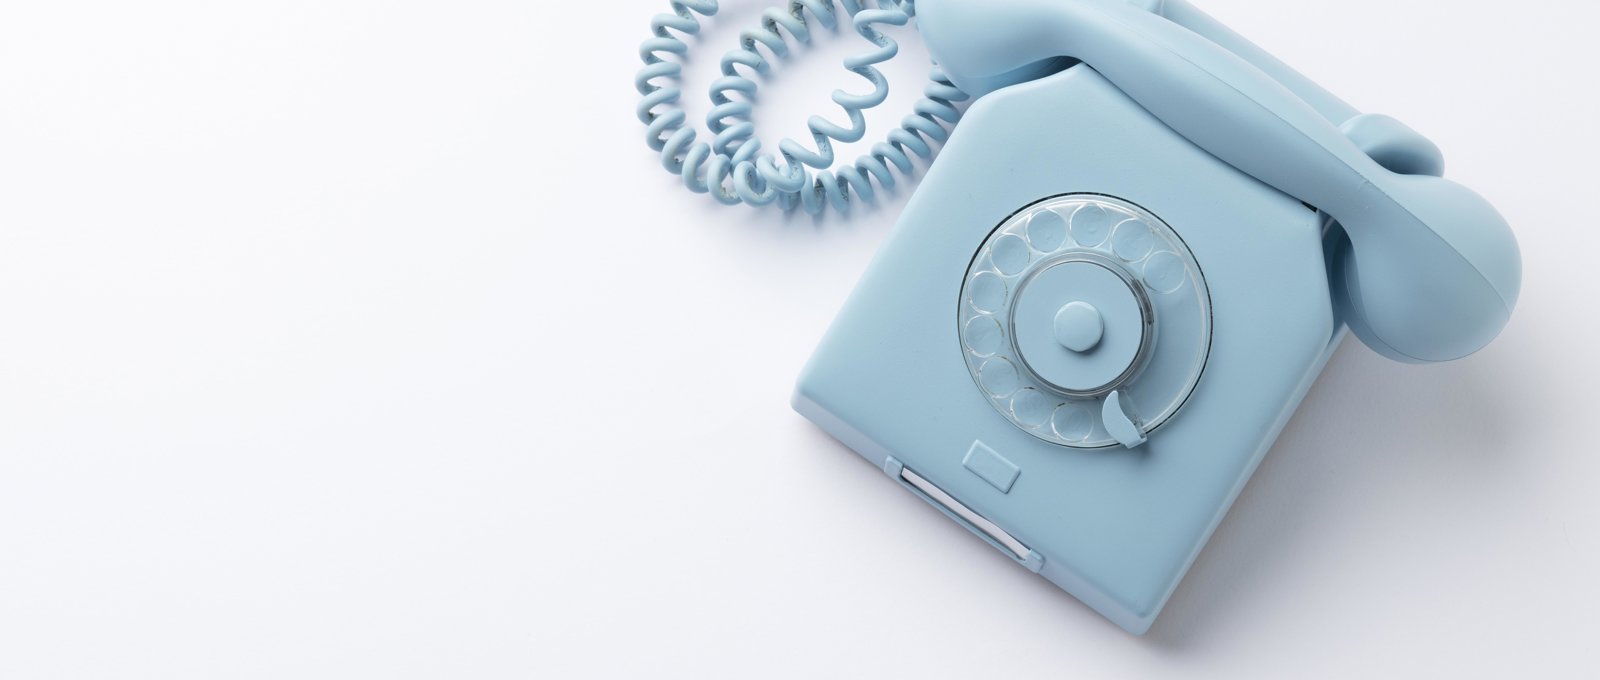 Top View Blue Monday Concept Composition With Telephone